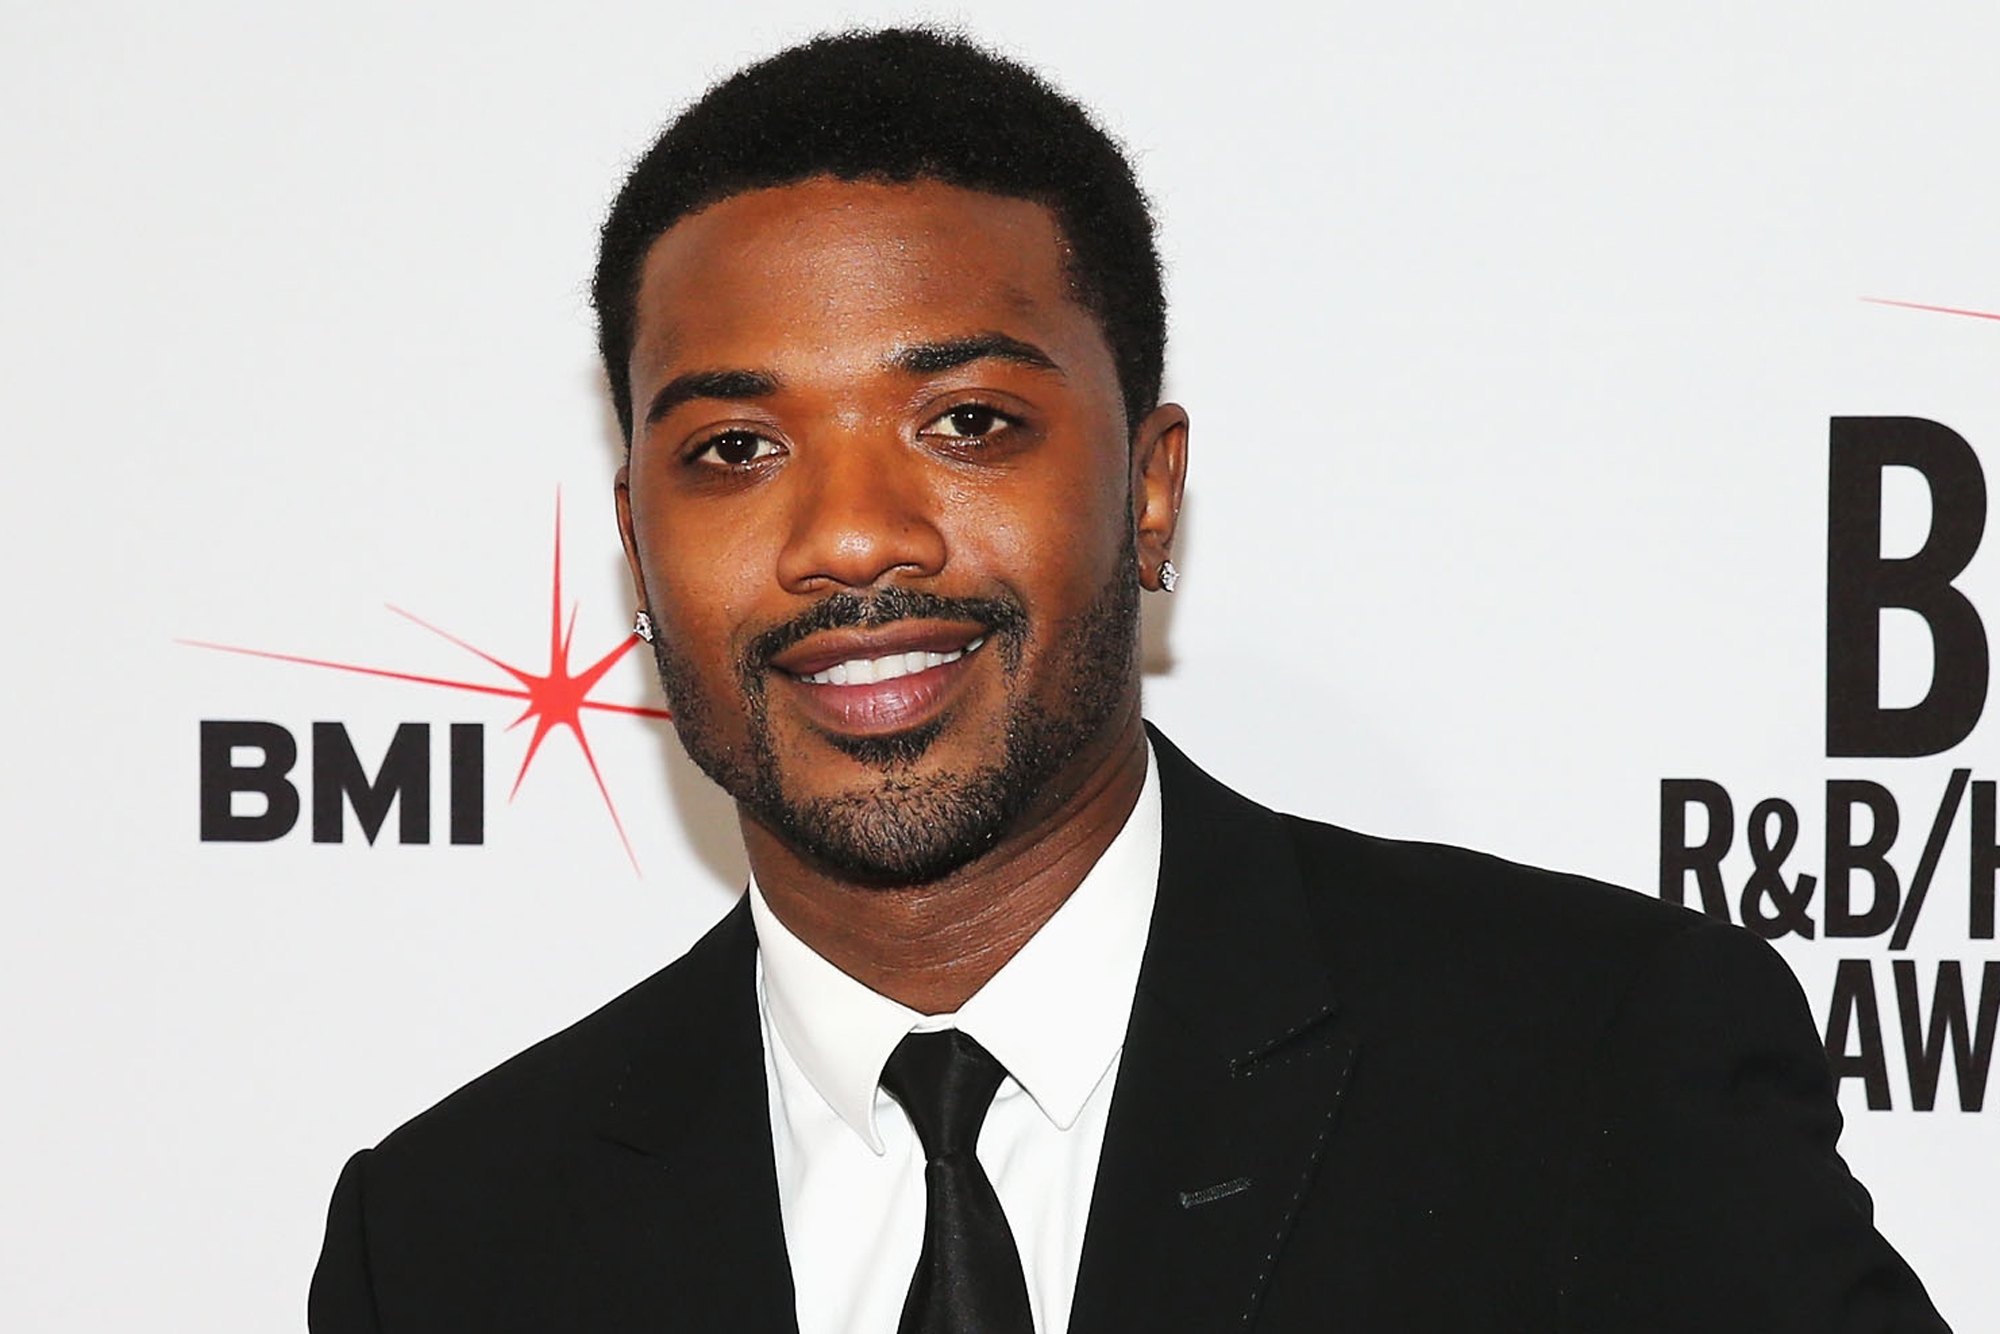 Where is Ray J's net worth?